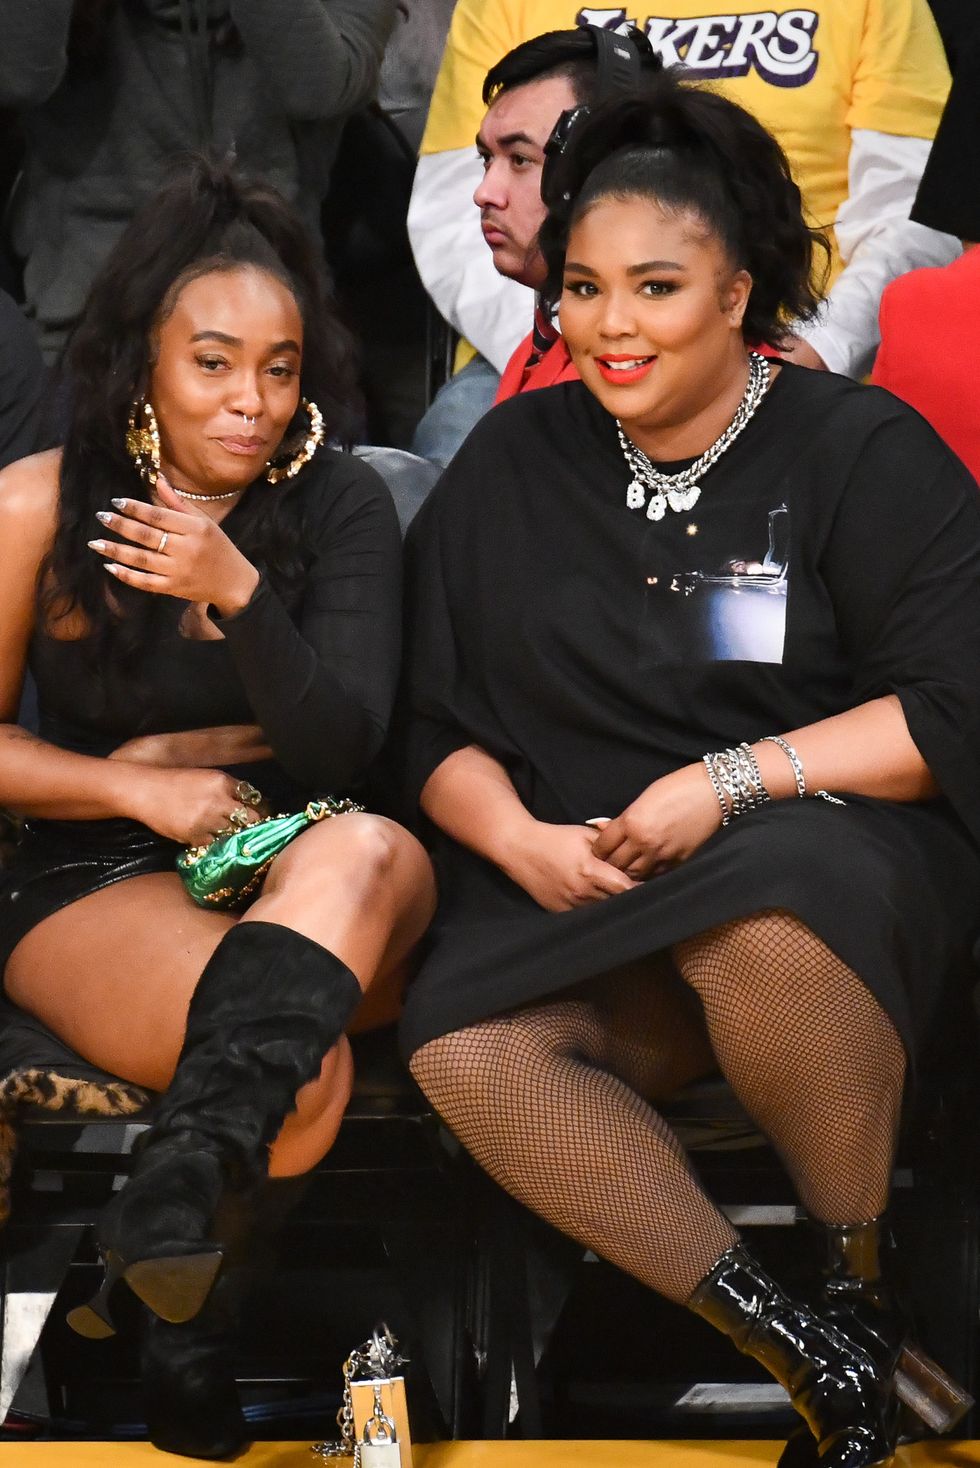 https://hips.hearstapps.com/hmg-prod/images/singer-lizzo-attends-a-basketball-game-between-the-los-news-photo-1596641390.jpg?crop=0.410xw:0.921xh;0.386xw,0.0408xh&resize=980:*